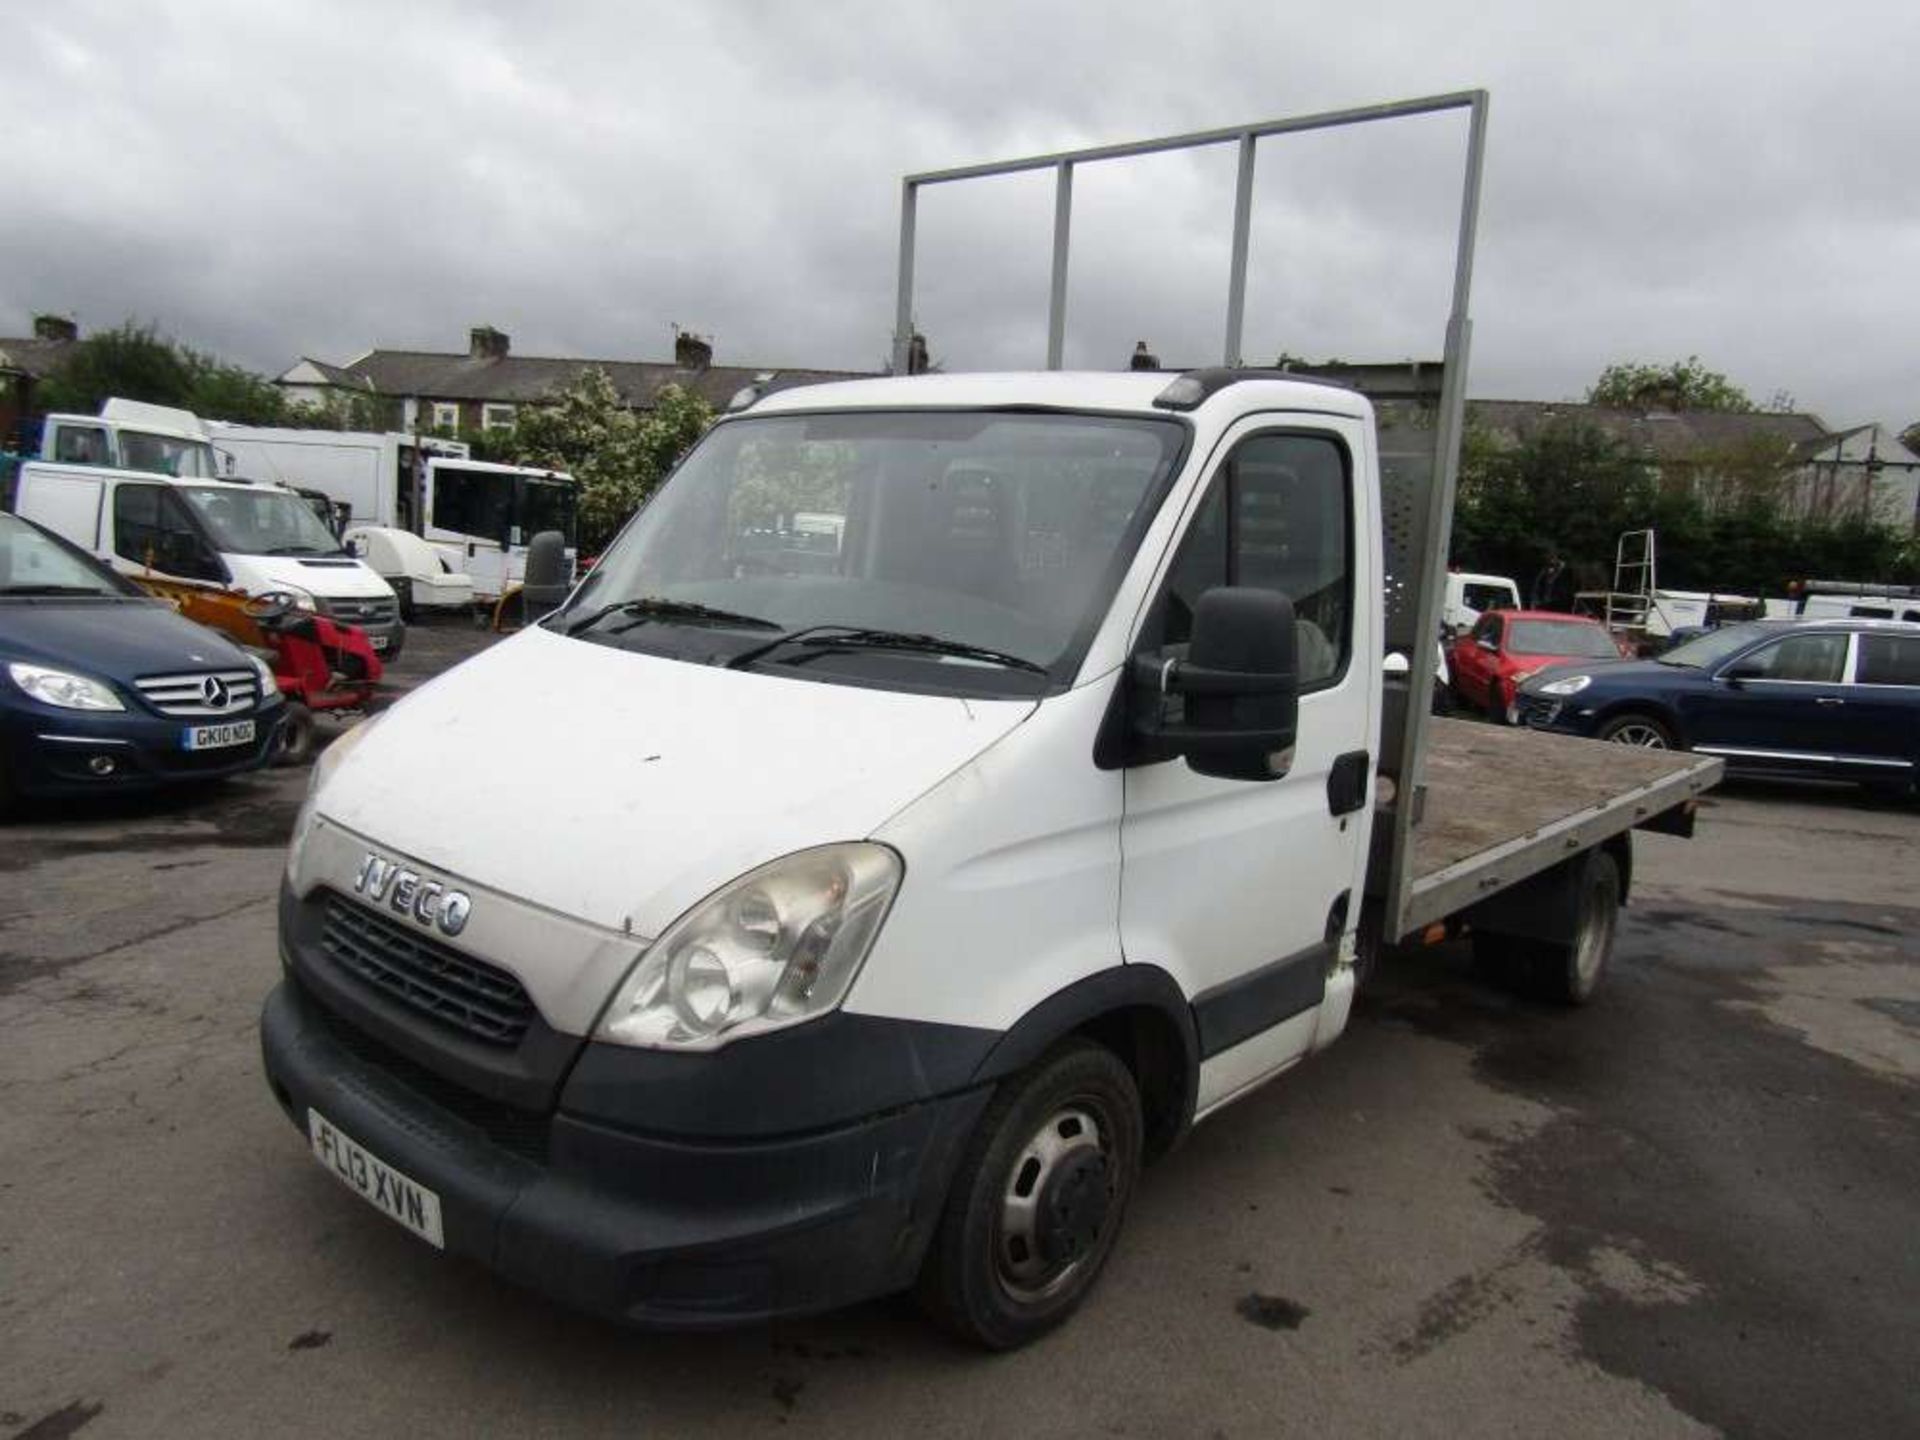 2013 13 reg Iveco Daily 35C15 LWB - Image 2 of 6